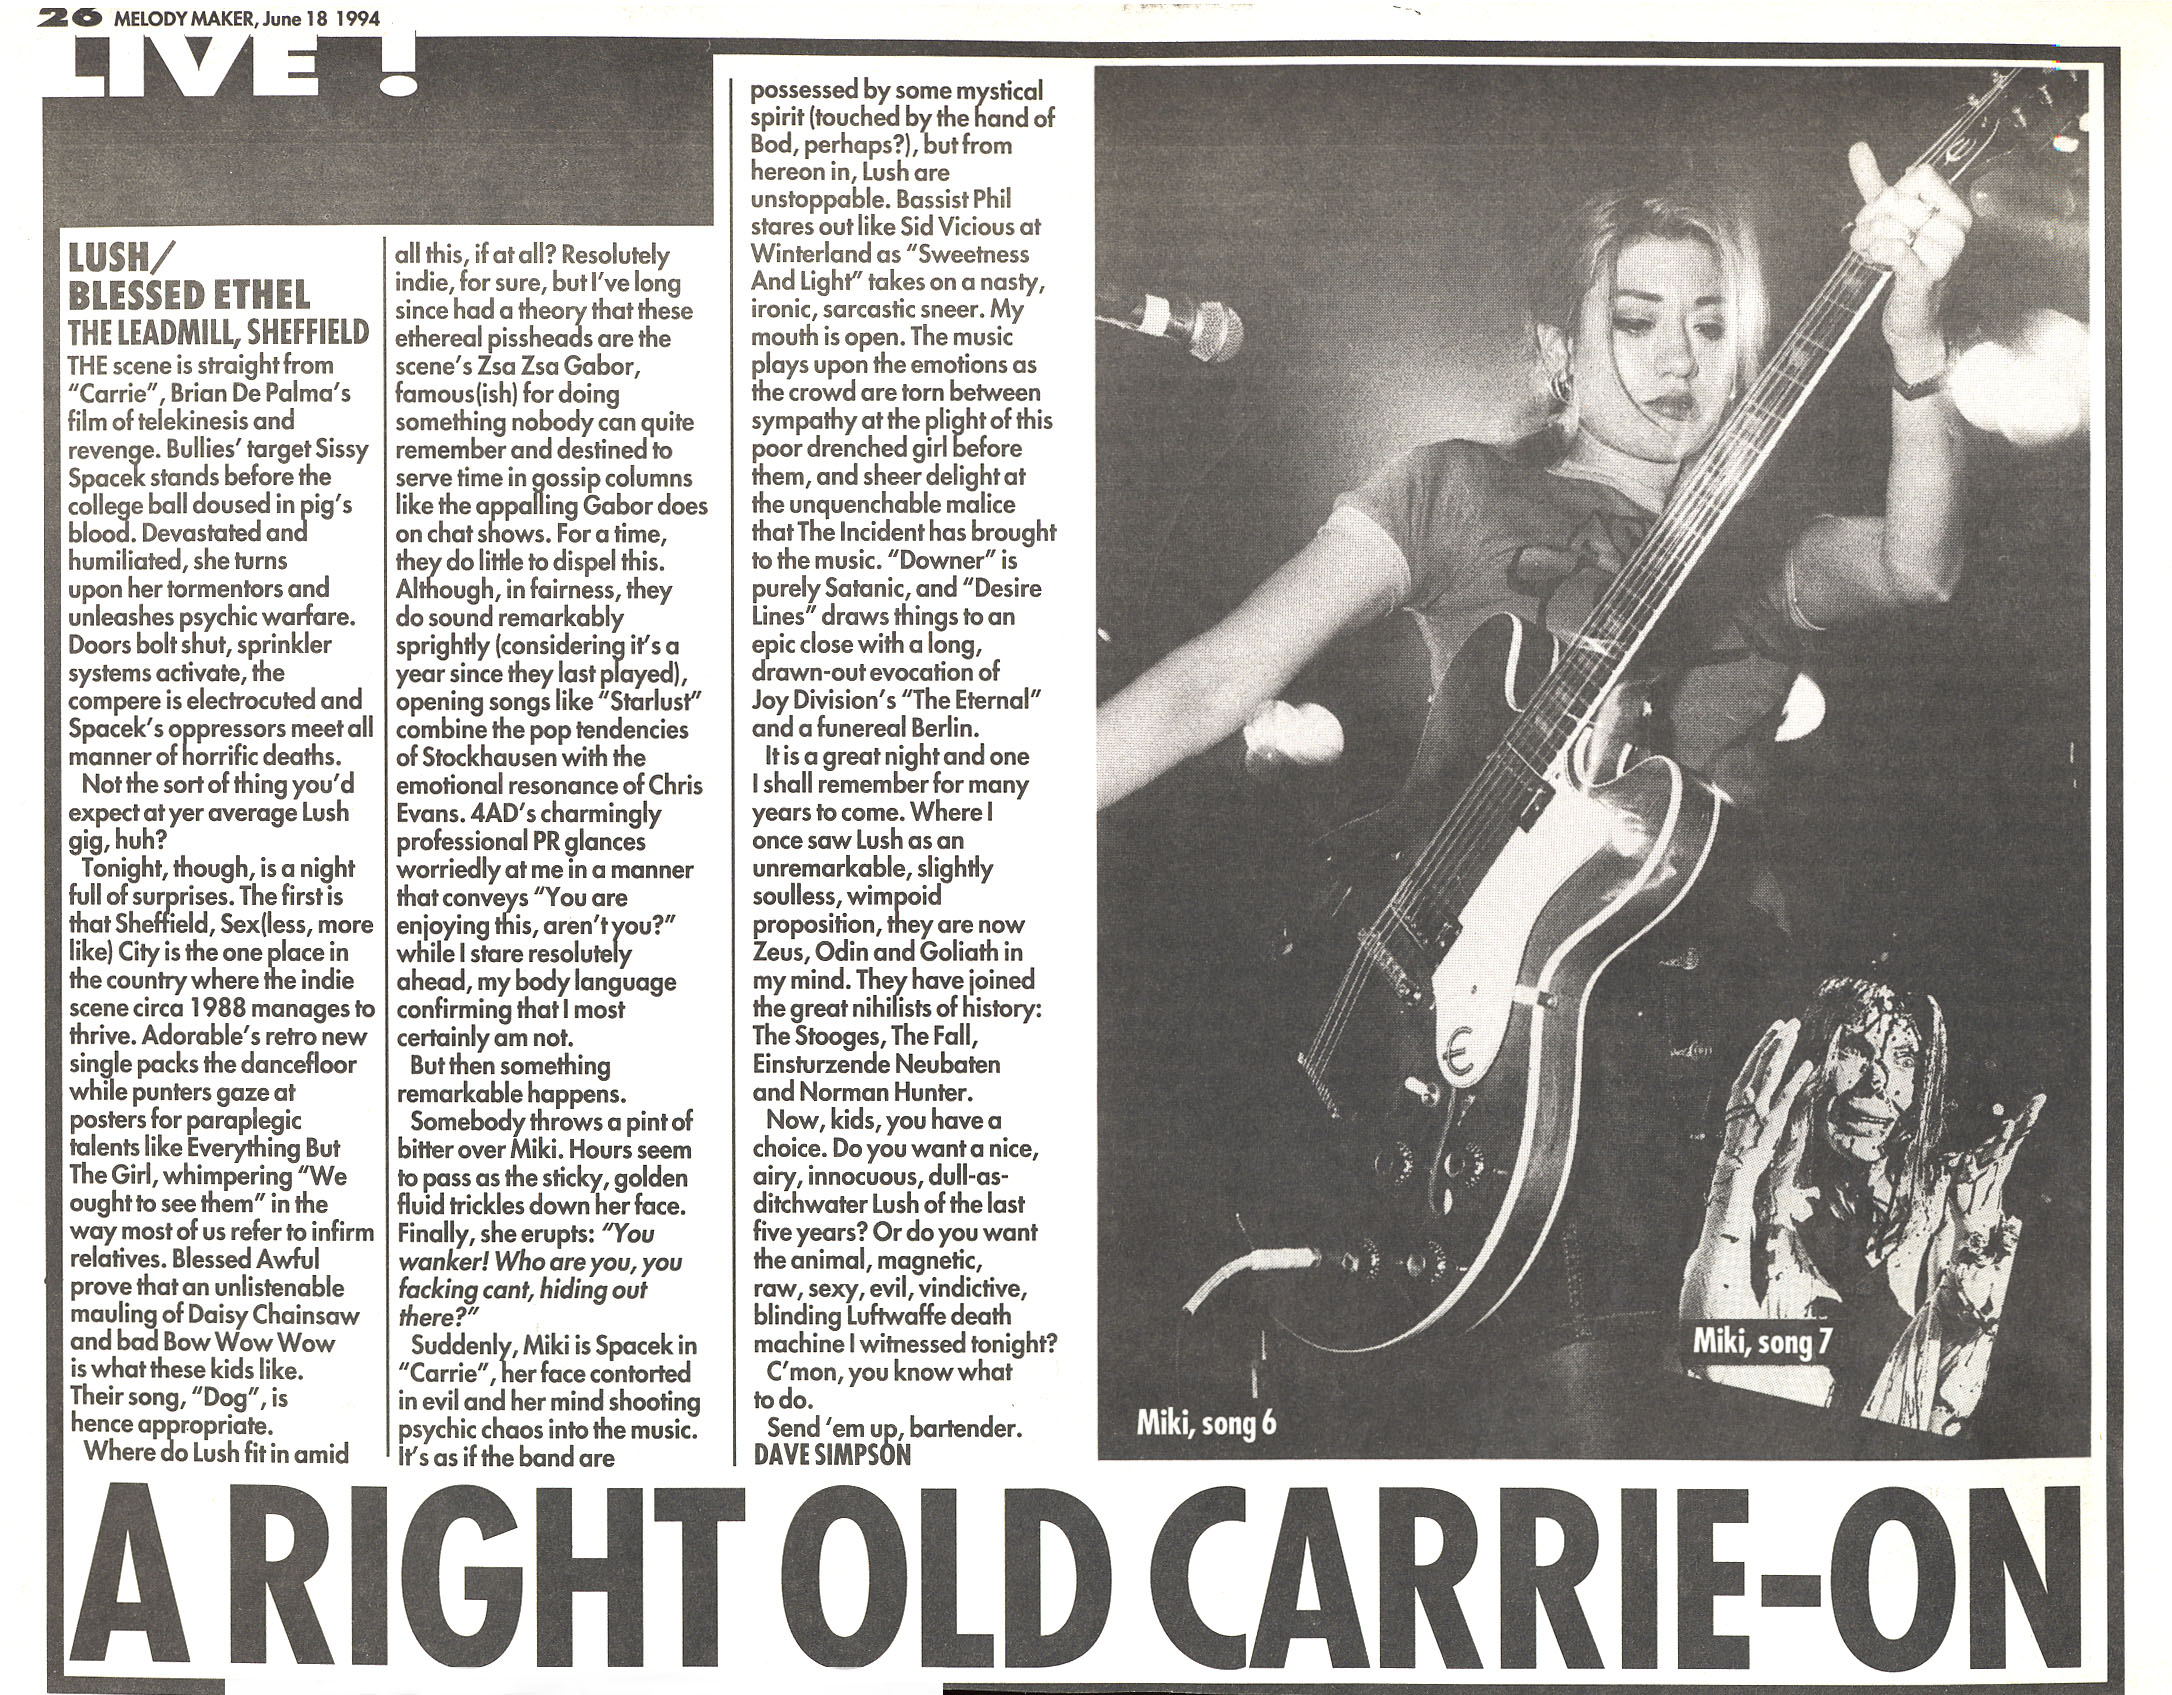 1994-Jun-18 Melody Maker A Right Old Carrie-On. 